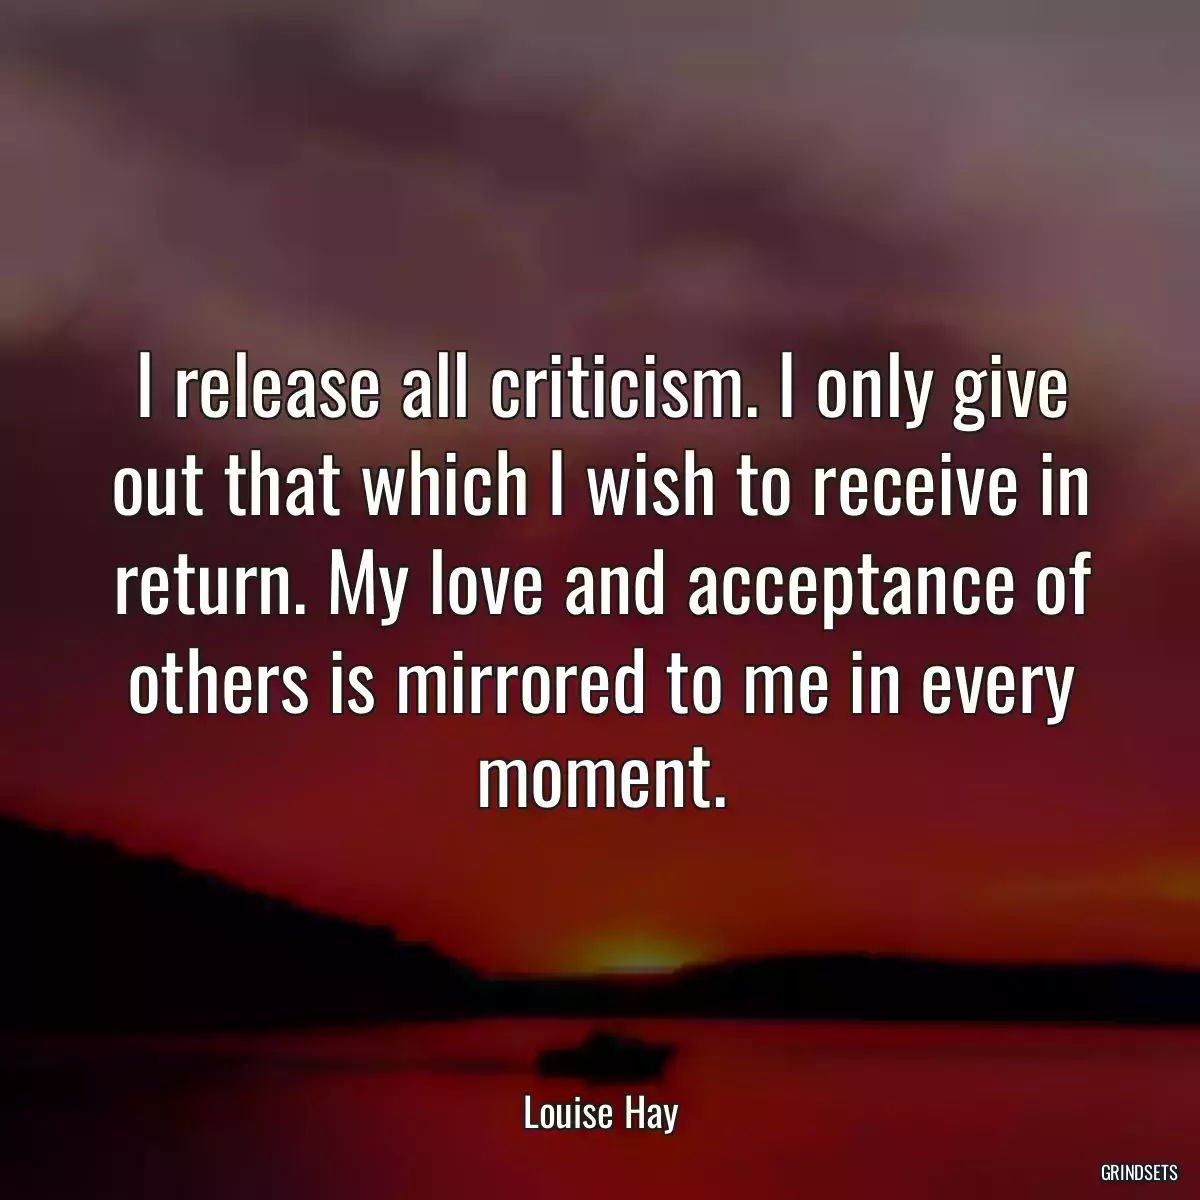 I release all criticism. I only give out that which I wish to receive in return. My love and acceptance of others is mirrored to me in every moment.